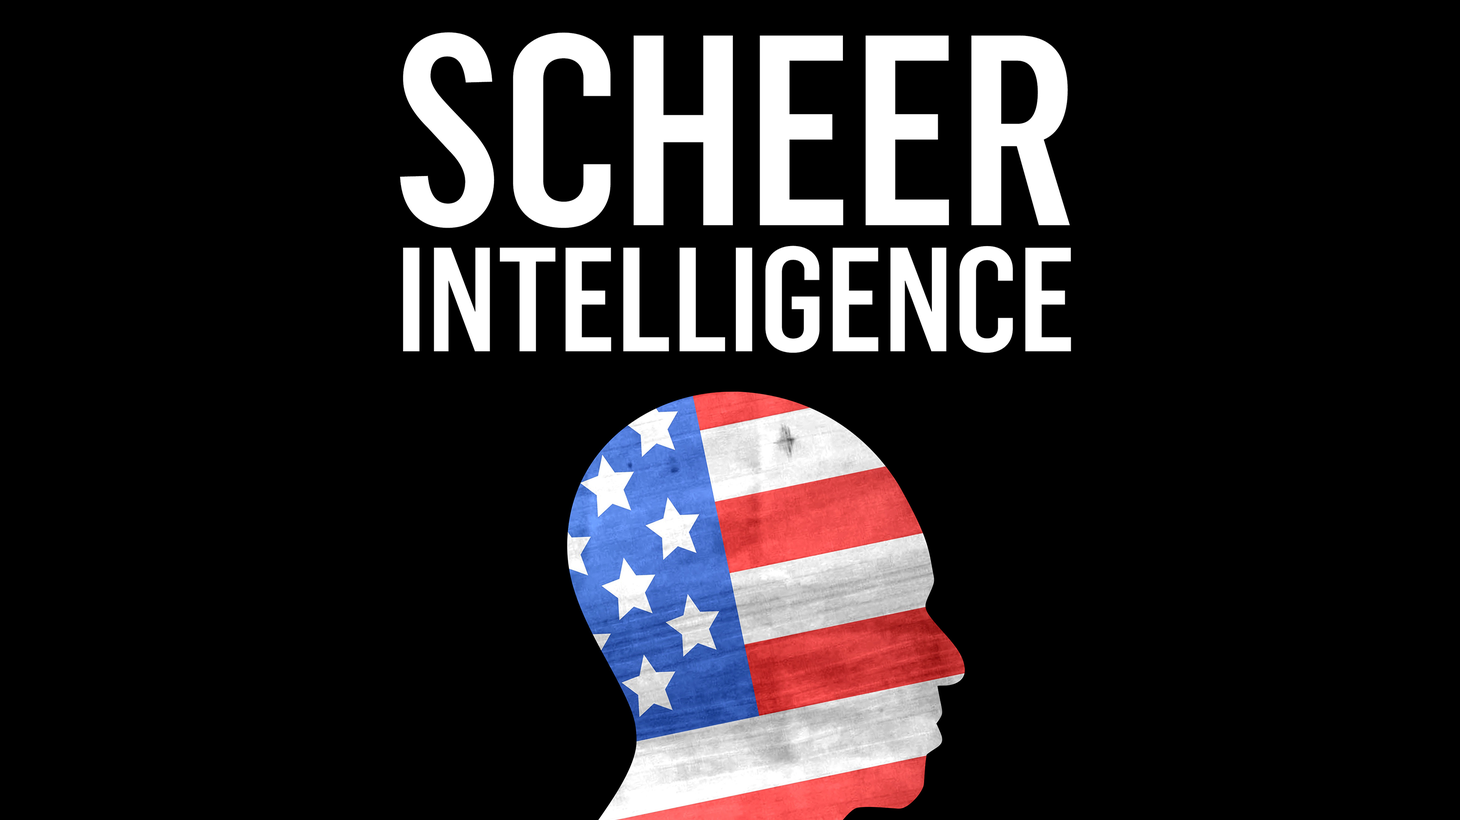 Robert Scheer speaks with David Talbot, the founder of Salon.com and author of several books to discuss the legacy of former CIA head Allen Dulles in post-World War II America and his impact on both foreign and domestic policy.